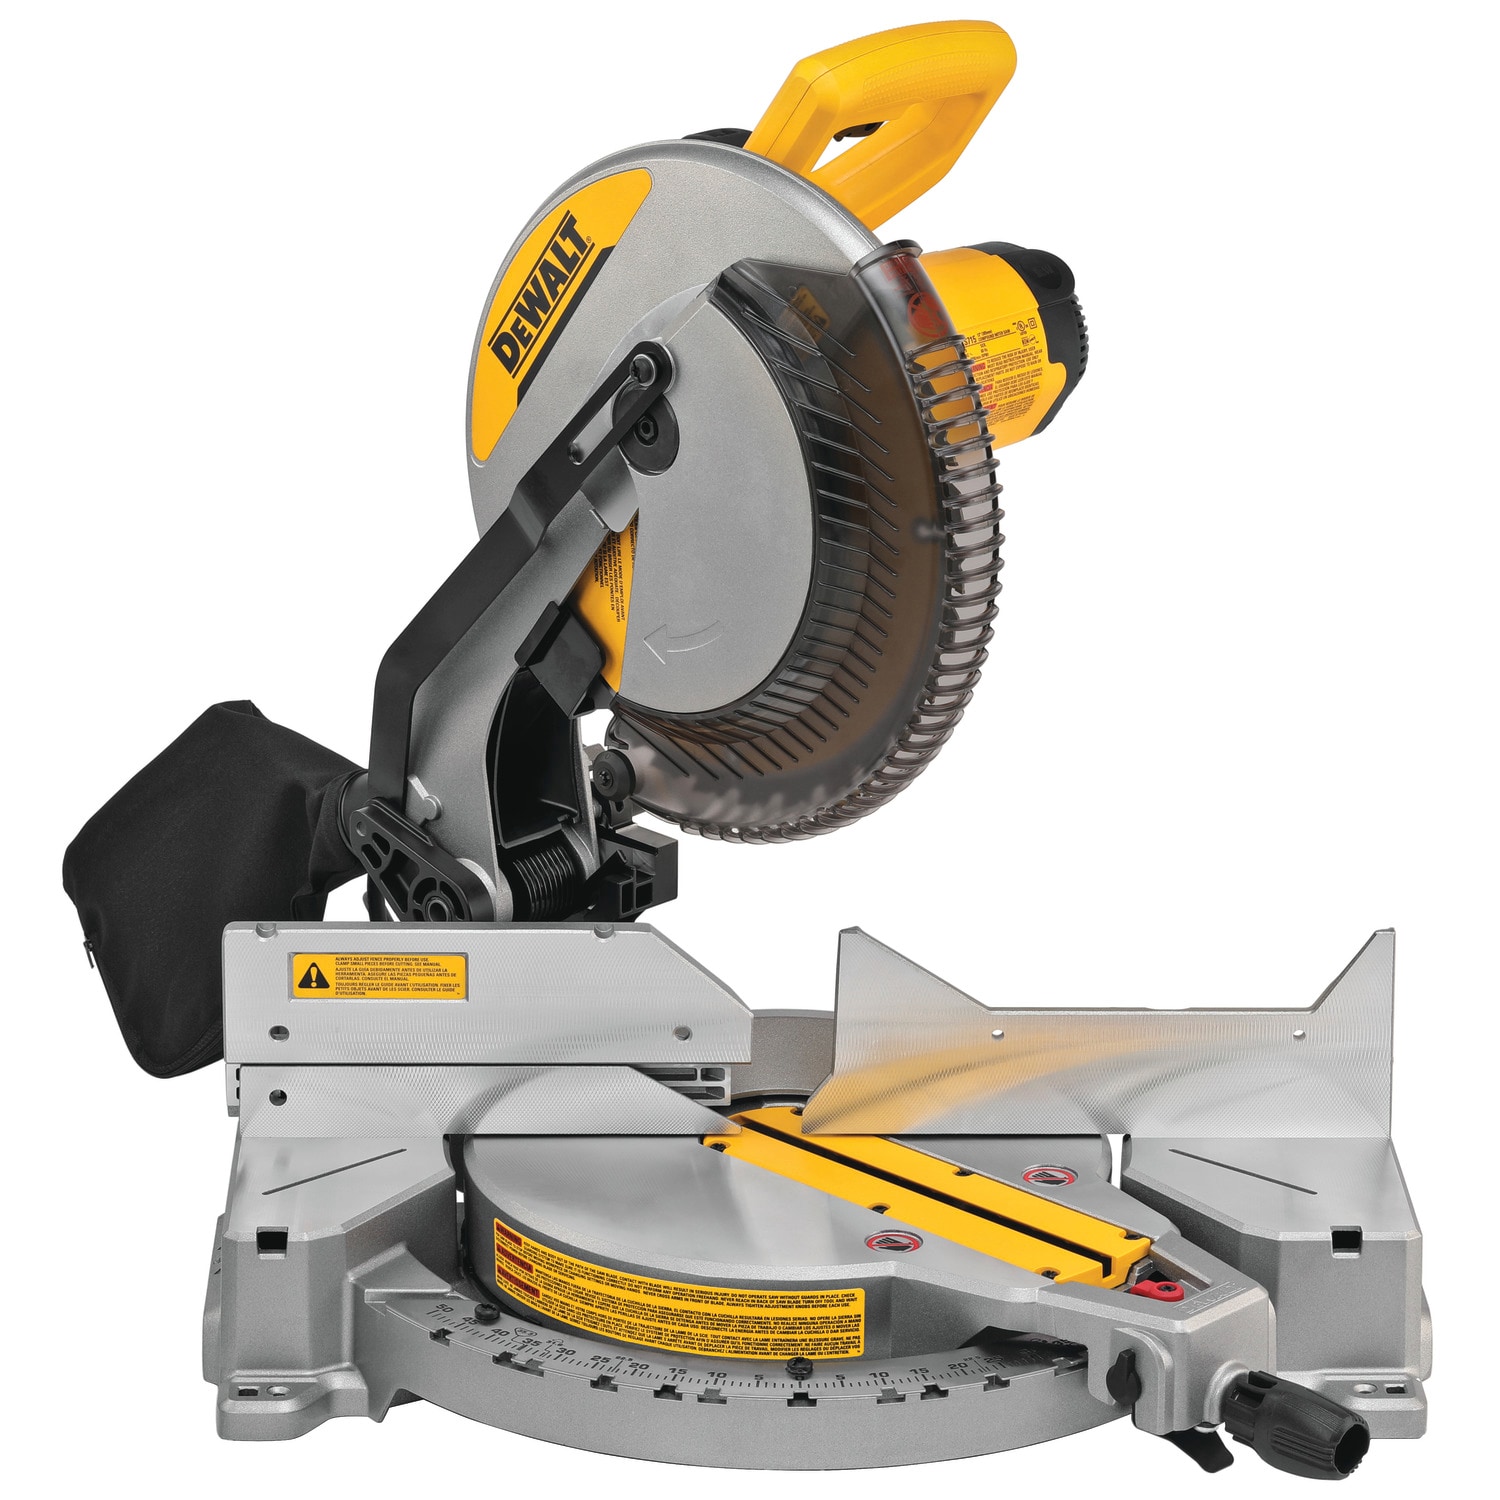 DEWALT 12-in 15 Amps Single Bevel Compound Corded Miter Saw on Sale At Lowe's